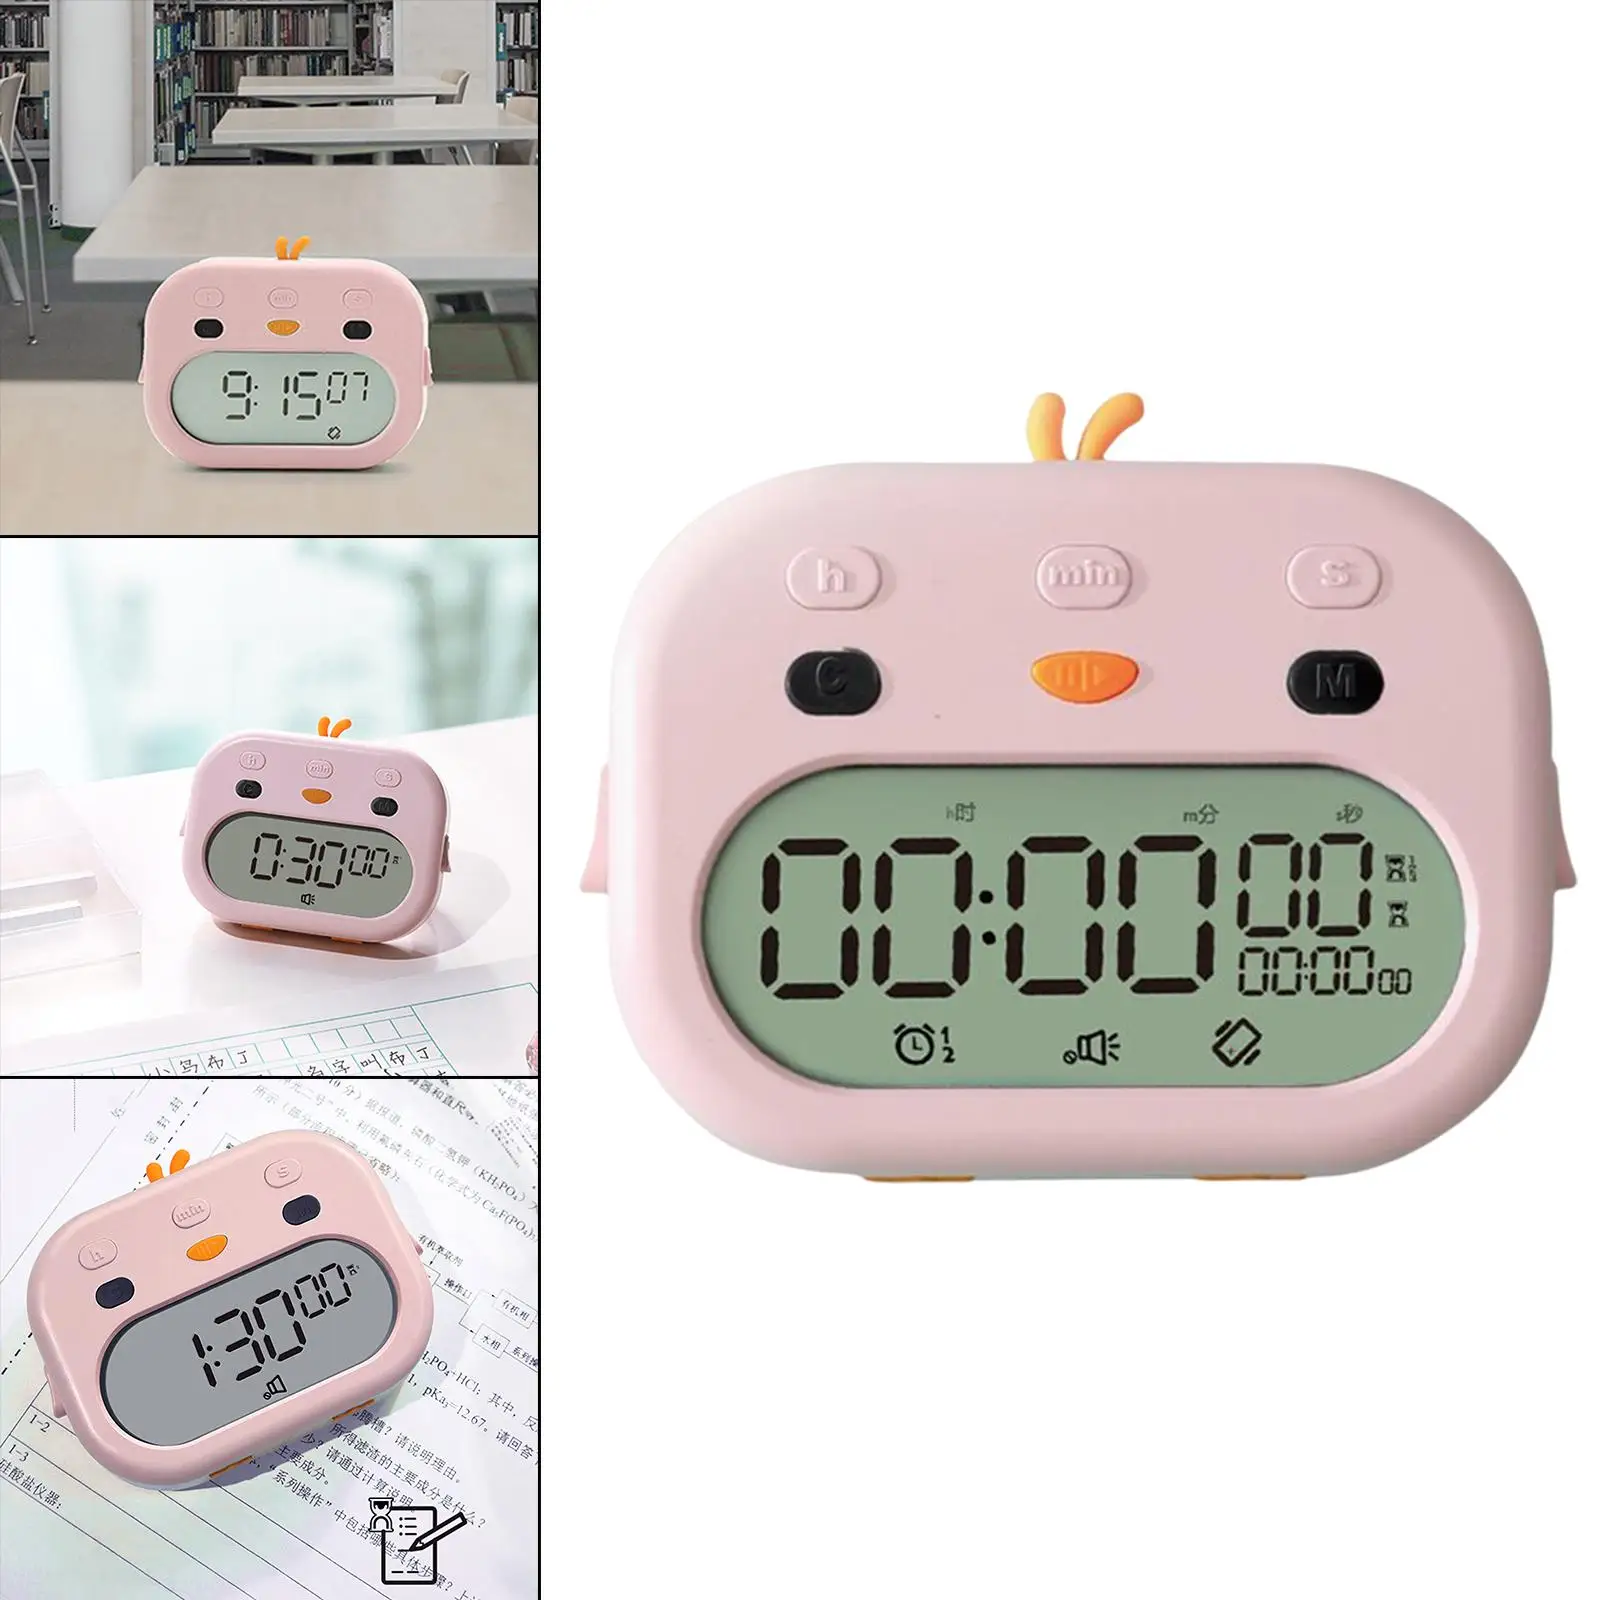 Multifunctional Digital Timer Clock Cute Count up Down with Stand Portable Power Saving Adjustable Loud Alarm for Games Sports